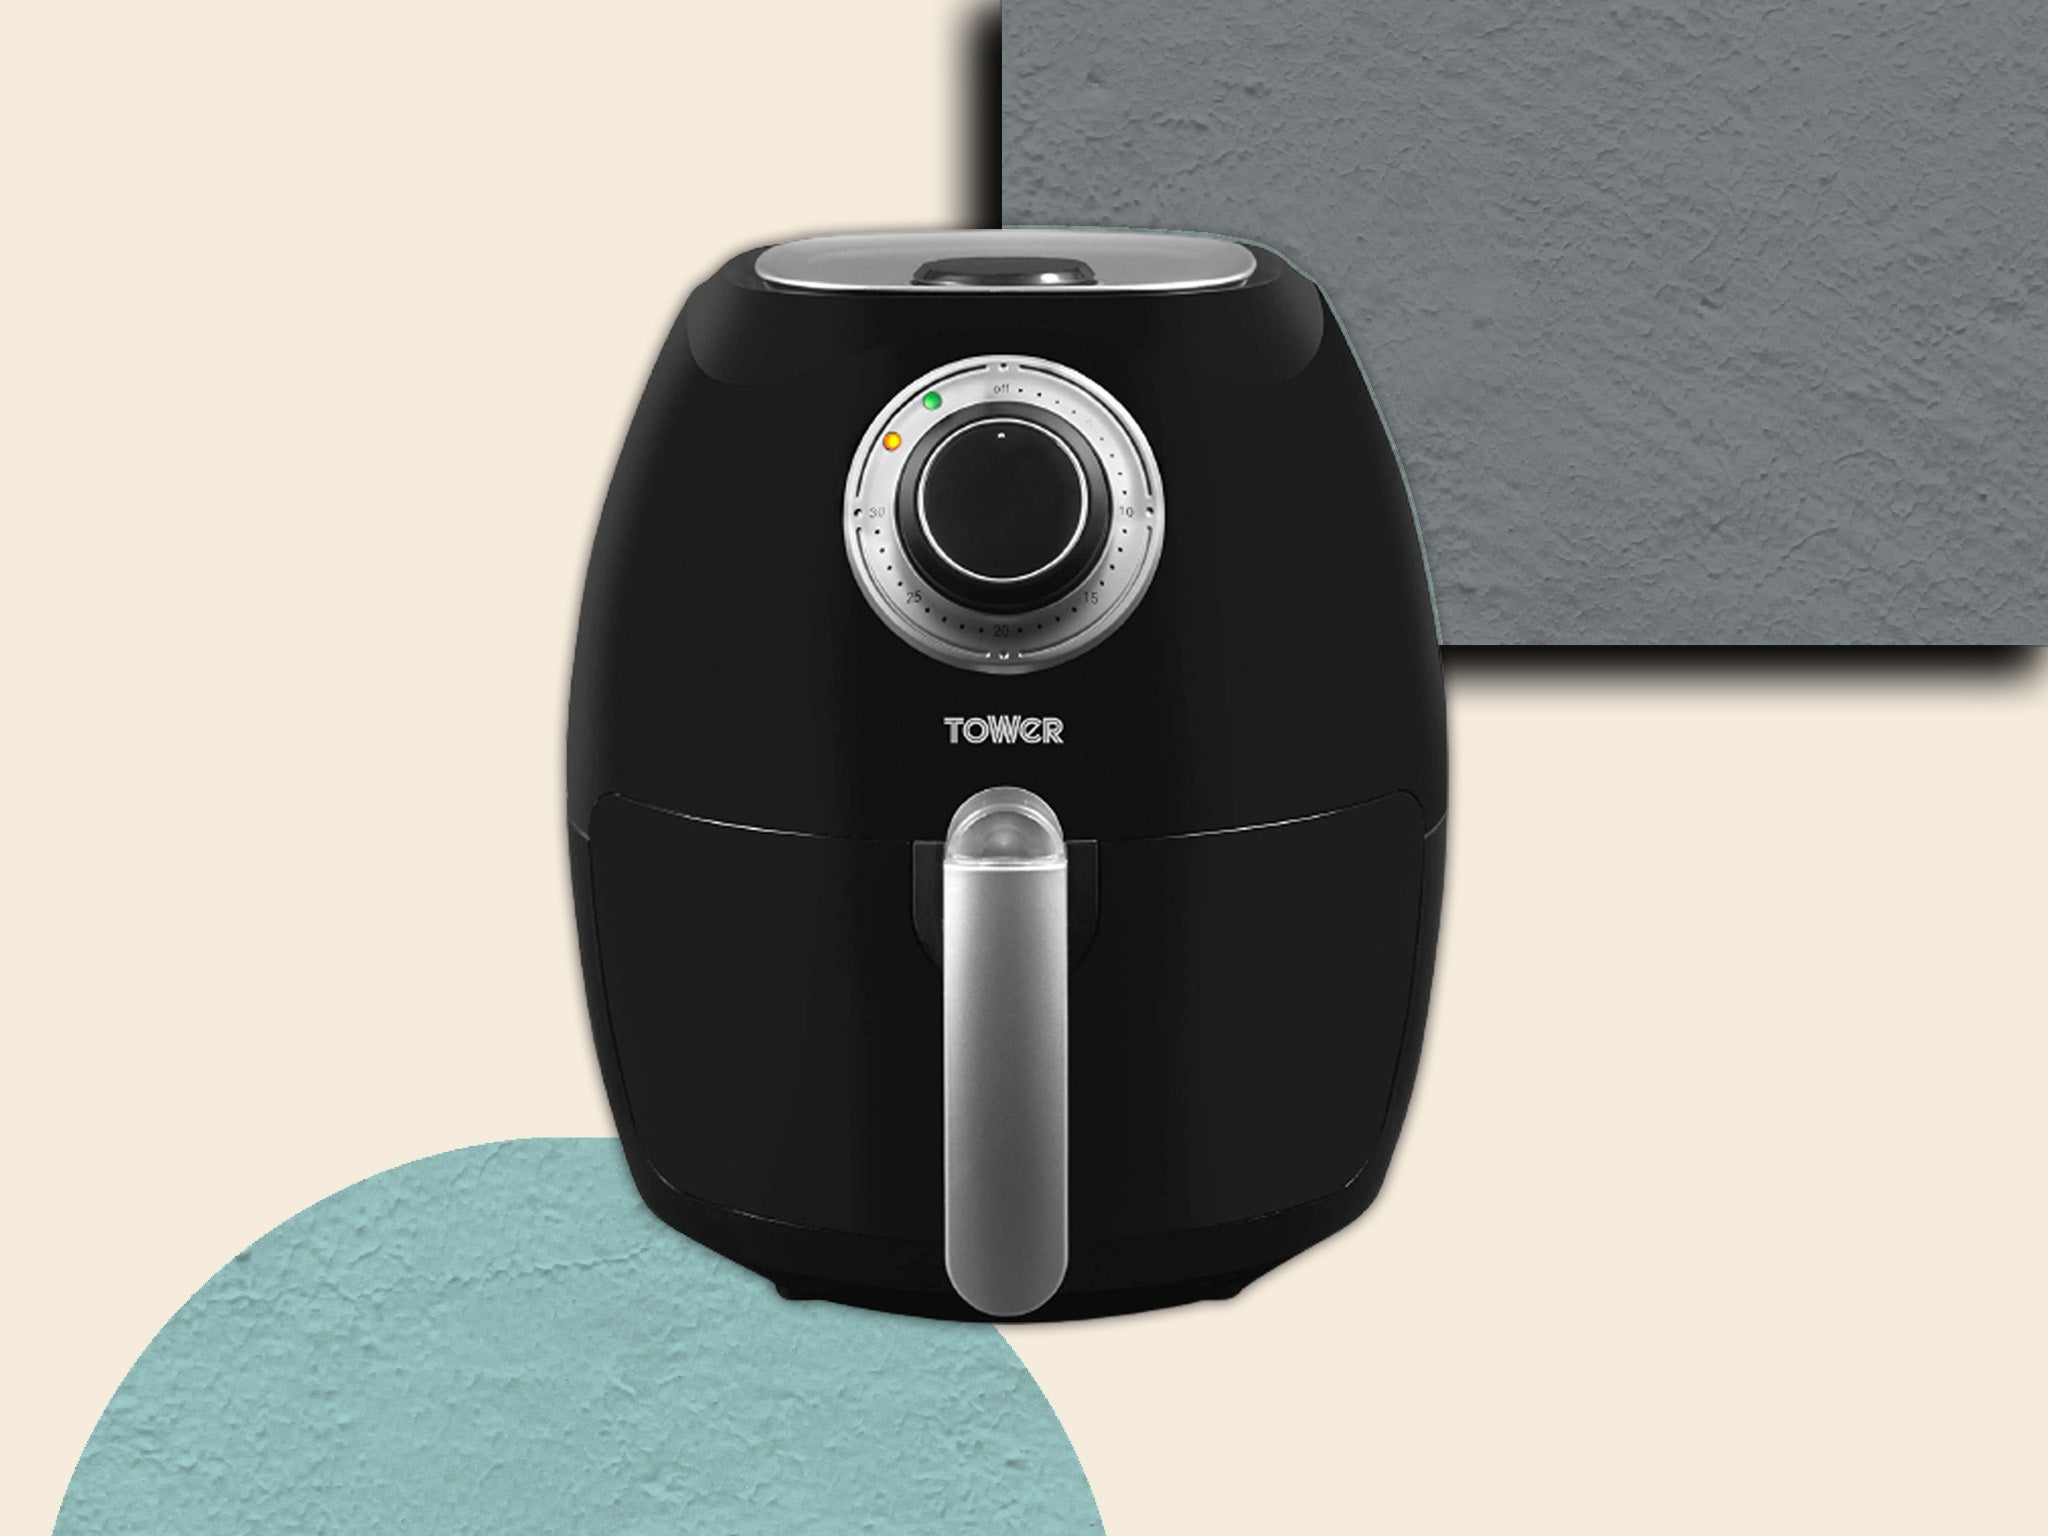 It’s rare to find such a good air fryer deal, so snap this one up while you can